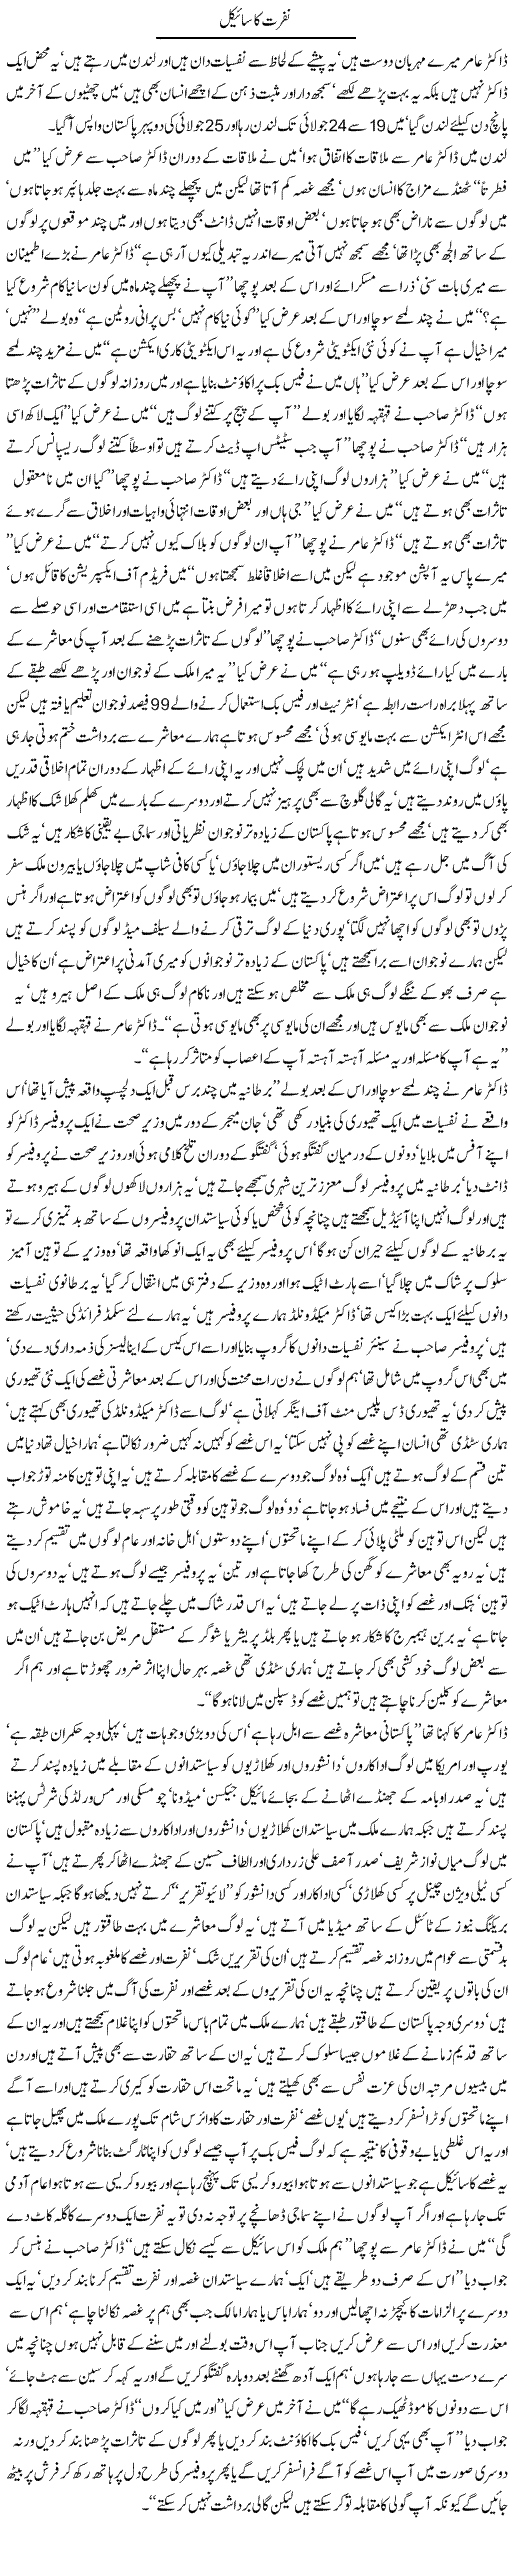 Cycle of Hatred Express Column Javed Chaudhry 26 July 2011